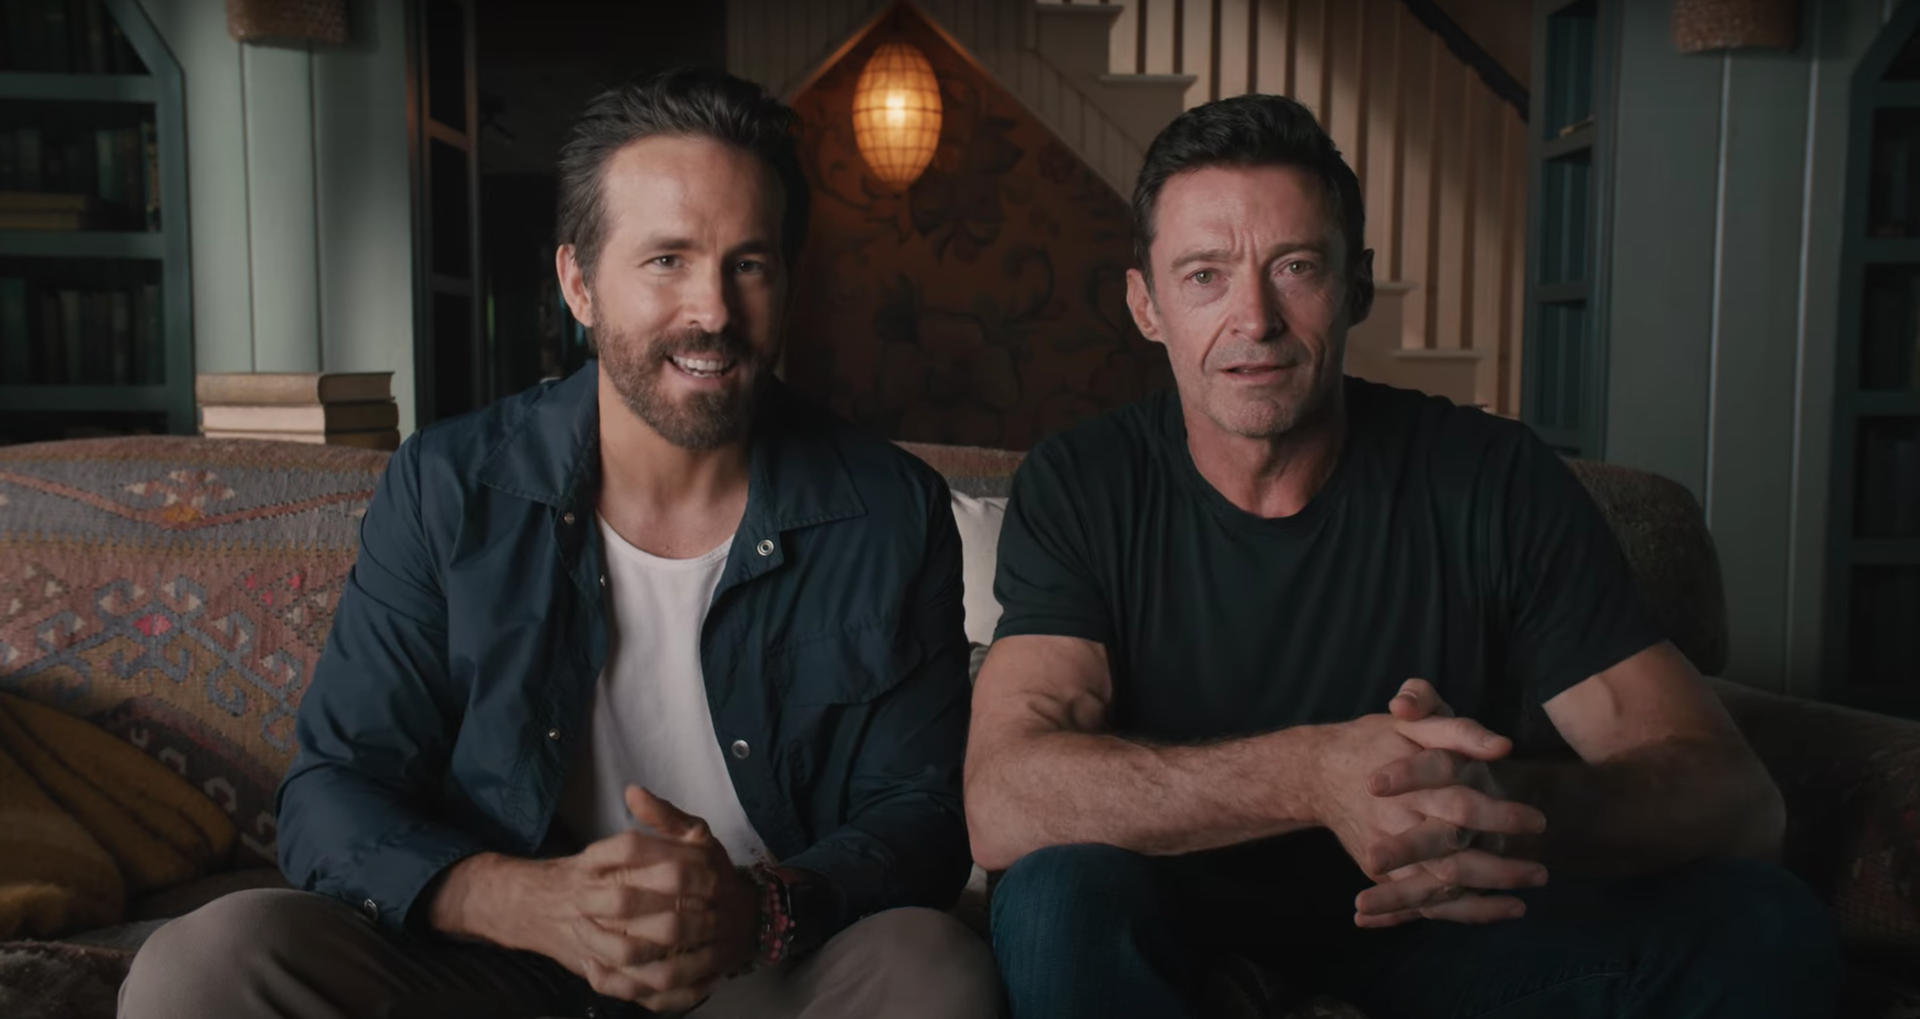 'Deadpool' will return to the MCU on September 6, 2024, and Ryan Reynolds reveals Hugh Jackman will reprise as Wolverine in the upcoming film.